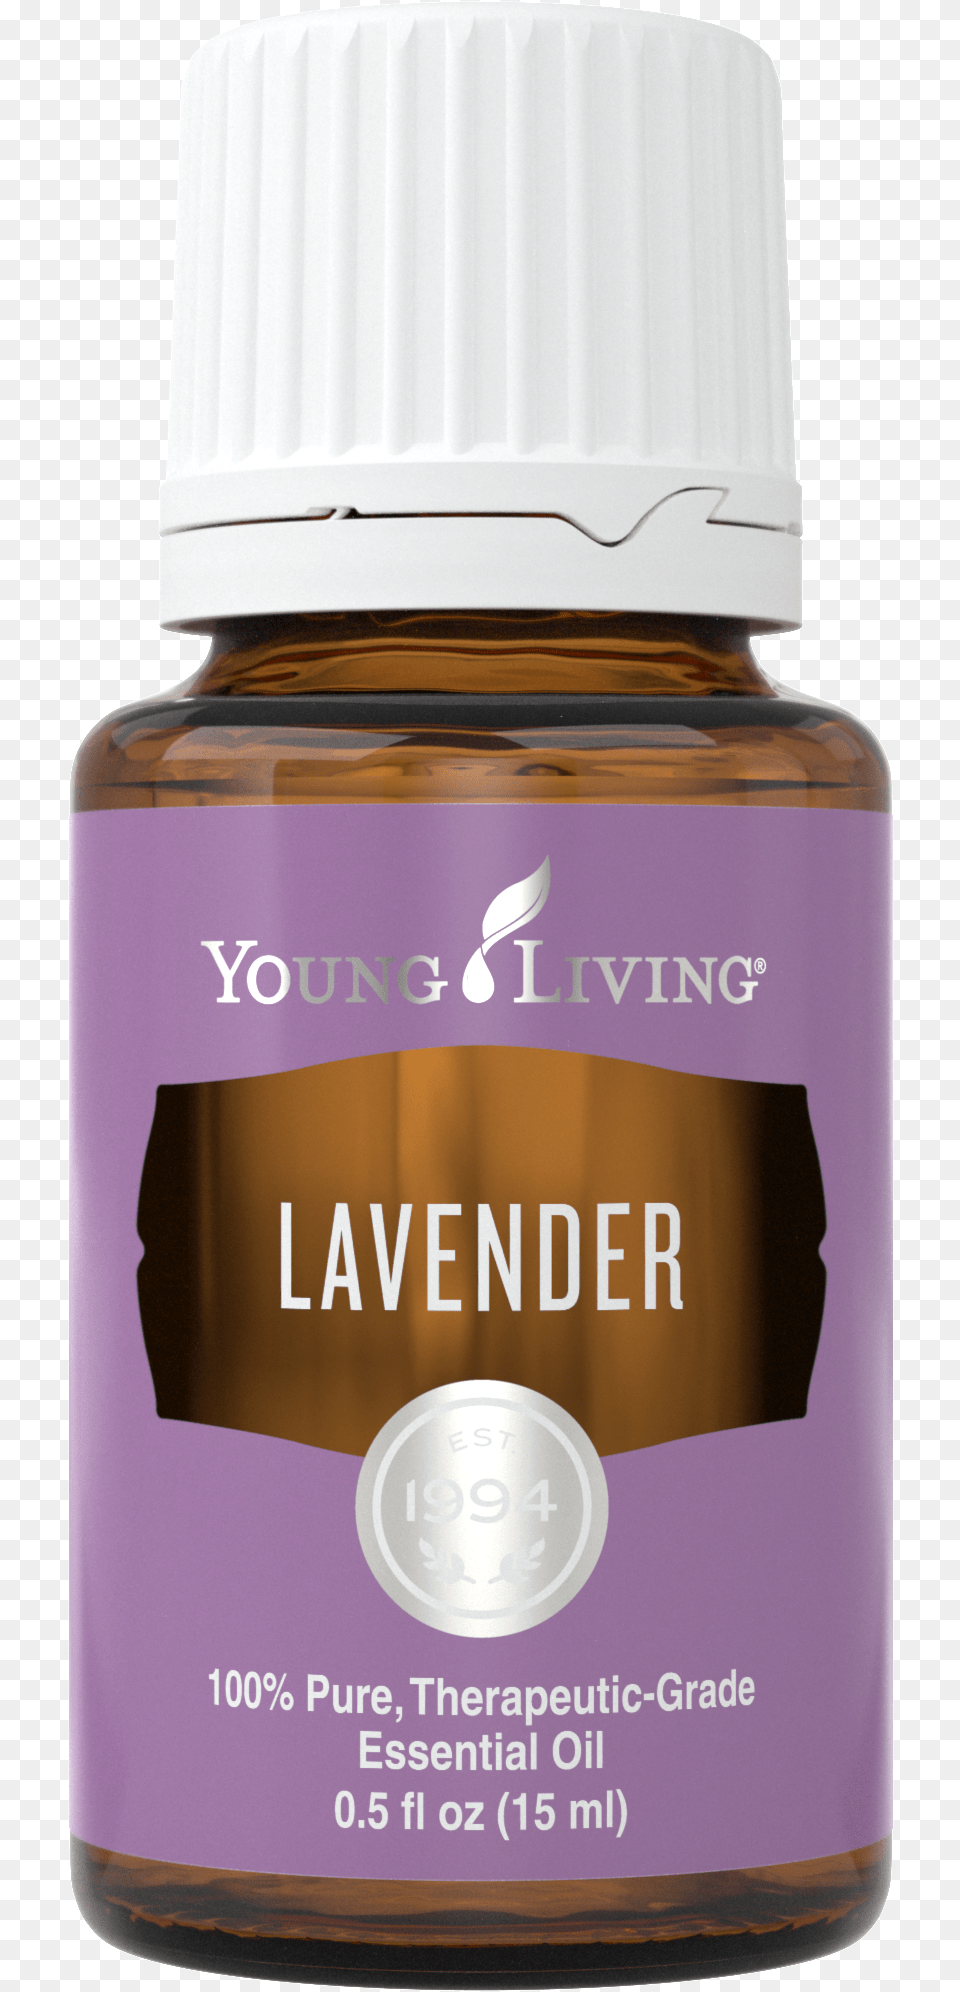 Lavender Young Living Lavender Essential Oil, Bottle, Cosmetics, Perfume Png